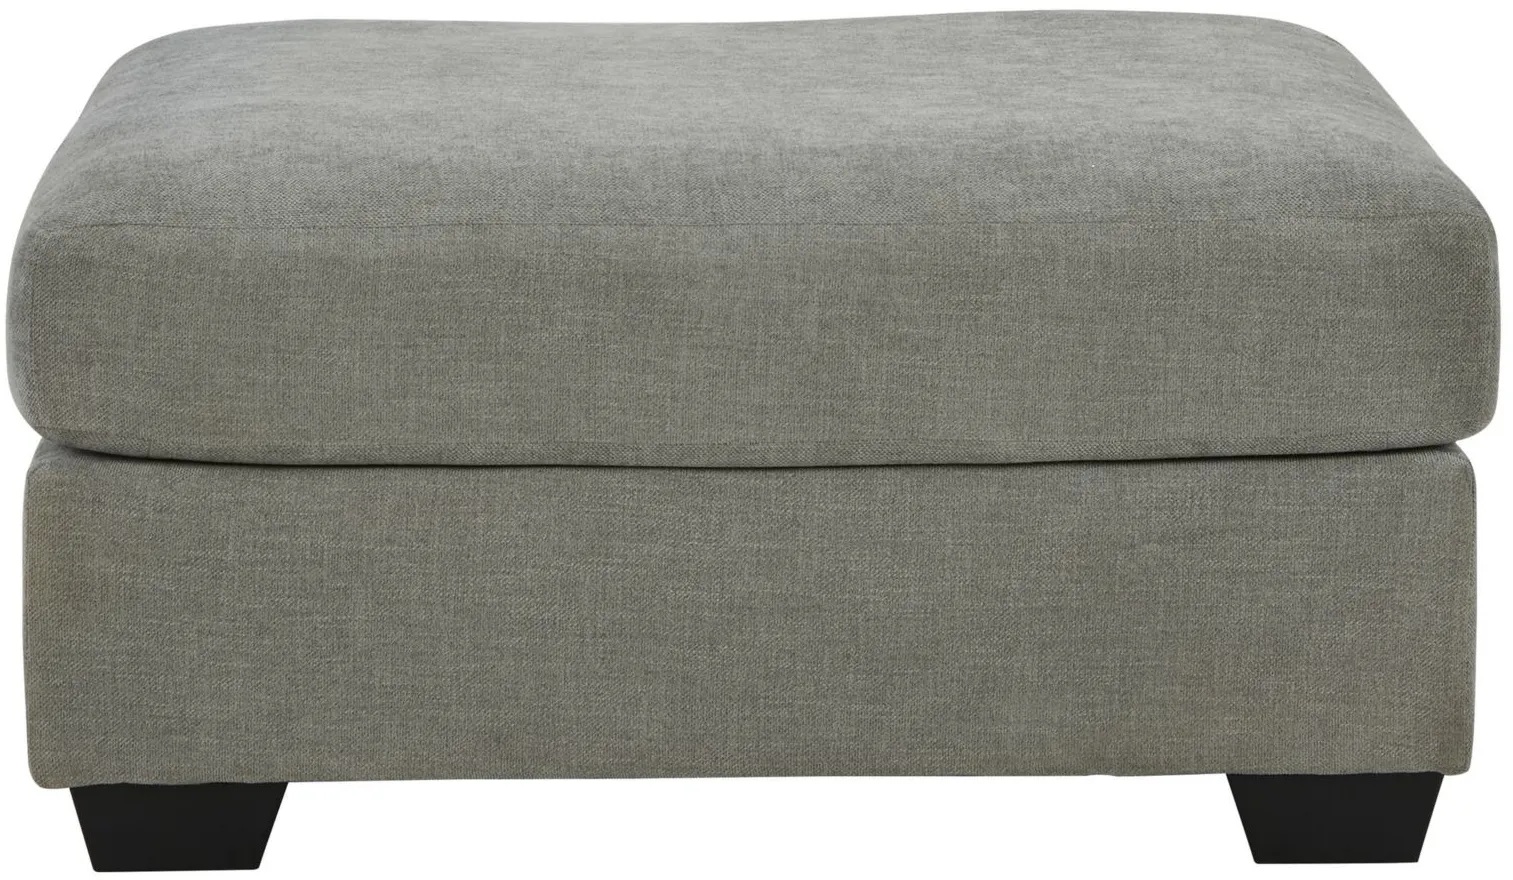 Keener Oversized Accent Ottoman in Ash by Ashley Furniture